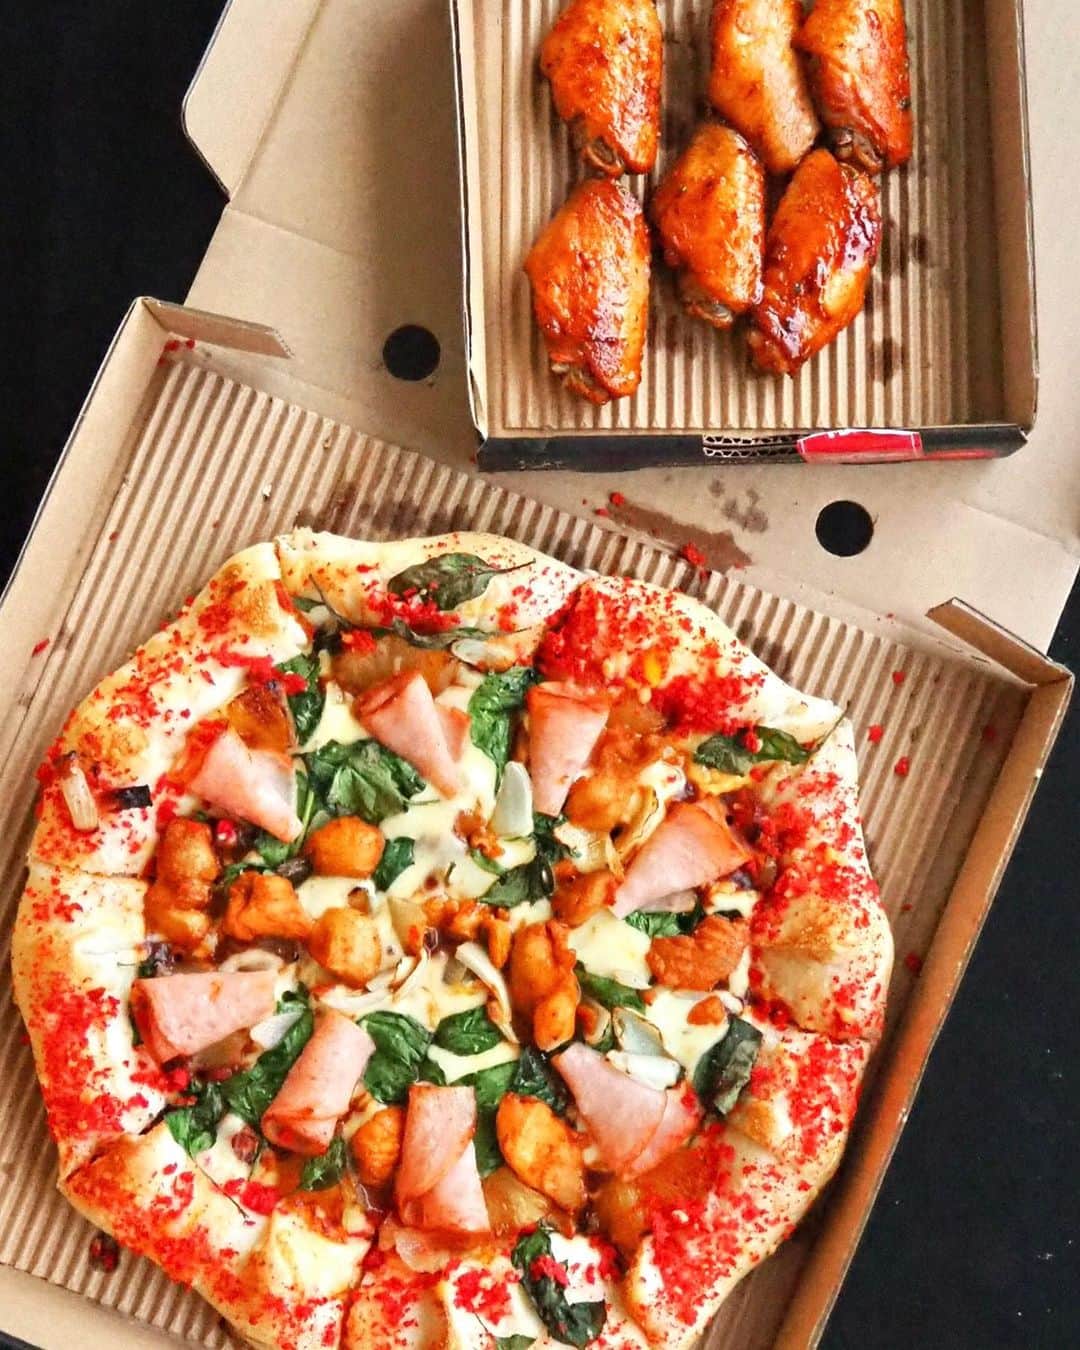 Li Tian の雑貨屋さんのインスタグラム写真 - (Li Tian の雑貨屋Instagram)「Feels like I’m having the best of both worlds with @pizzahut_sg festive specials 𝐂𝐡𝐫𝐢𝐬𝐭𝐦𝐚𝐬 𝐇𝐚𝐦 𝐒𝐮𝐩𝐞𝐫 𝐏𝐚𝐧 𝐏𝐢𝐳𝐳𝐚 as it is my dream combination of  𝐒𝐮𝐩𝐞𝐫 𝐂𝐫𝐢𝐬𝐩𝐲 𝐂𝐫𝐮𝐬𝐭 packed with 𝐒𝐮𝐩𝐞𝐫 𝐎𝐨𝐳𝐲 𝐂𝐡𝐞𝐞𝐬𝐞 melting out! 😍🤤   This special edition is only available for their Pizza Hut Christmas menu namely, Christmas Ham Super Pan Pizza, The Four Cheese Super Pan Pizza and Hawaiian Super Pan Pizza.   Highly recommend this Christmas Ham Super Pan Pizza which features Turkey Ham, Roasted Pineapples Chunks, Baby Spinach, Marinated spicy Chicken Chunks, Mozzarella and sprinkled with Red Parmesan Crumbs   Don’t miss the 𝟓𝟎%𝐎𝐅𝐅 deals for delivery and takeaway  as well as unbeatable festive meal sets!  ⠀  • • • • #singapore #yummy #love #sgfood #foodporn #igsg #グルメ #instafood #gourmet #beautifulcuisines #onthetable #sgeatout #cafe #sgeats #f52grams #feedfeed  #foodsg #savefnbsg #sgblog #christmas #sgchristmas #pizza #sgdelivery #sgpromo #cheeseporn #mediadrop」11月22日 14時19分 - dairyandcream